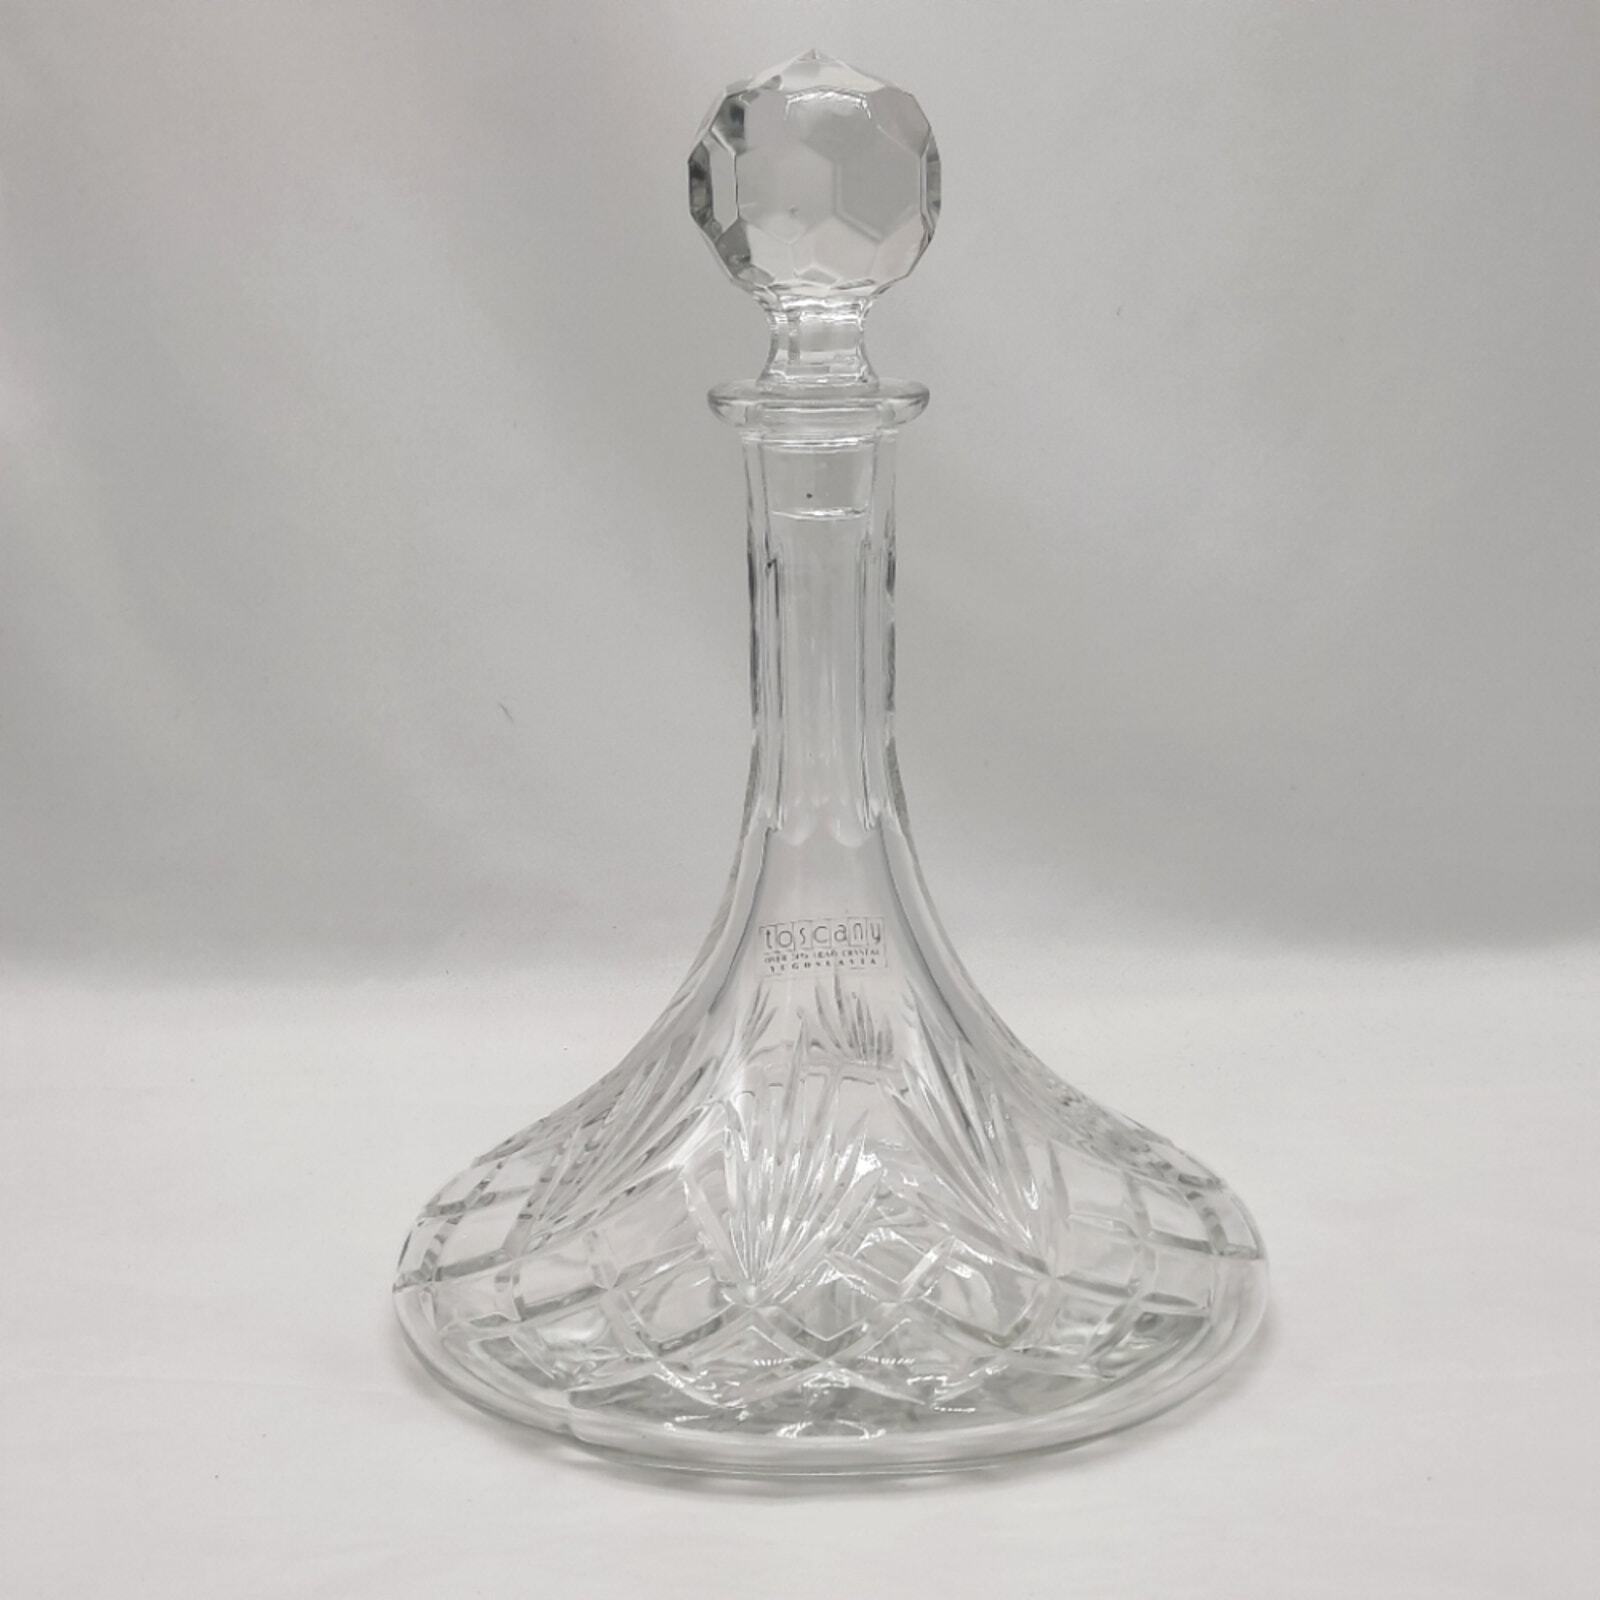 Vintage Toscany Crystal Clear Ships Liquor Decanter With Stopper Bar Collectible